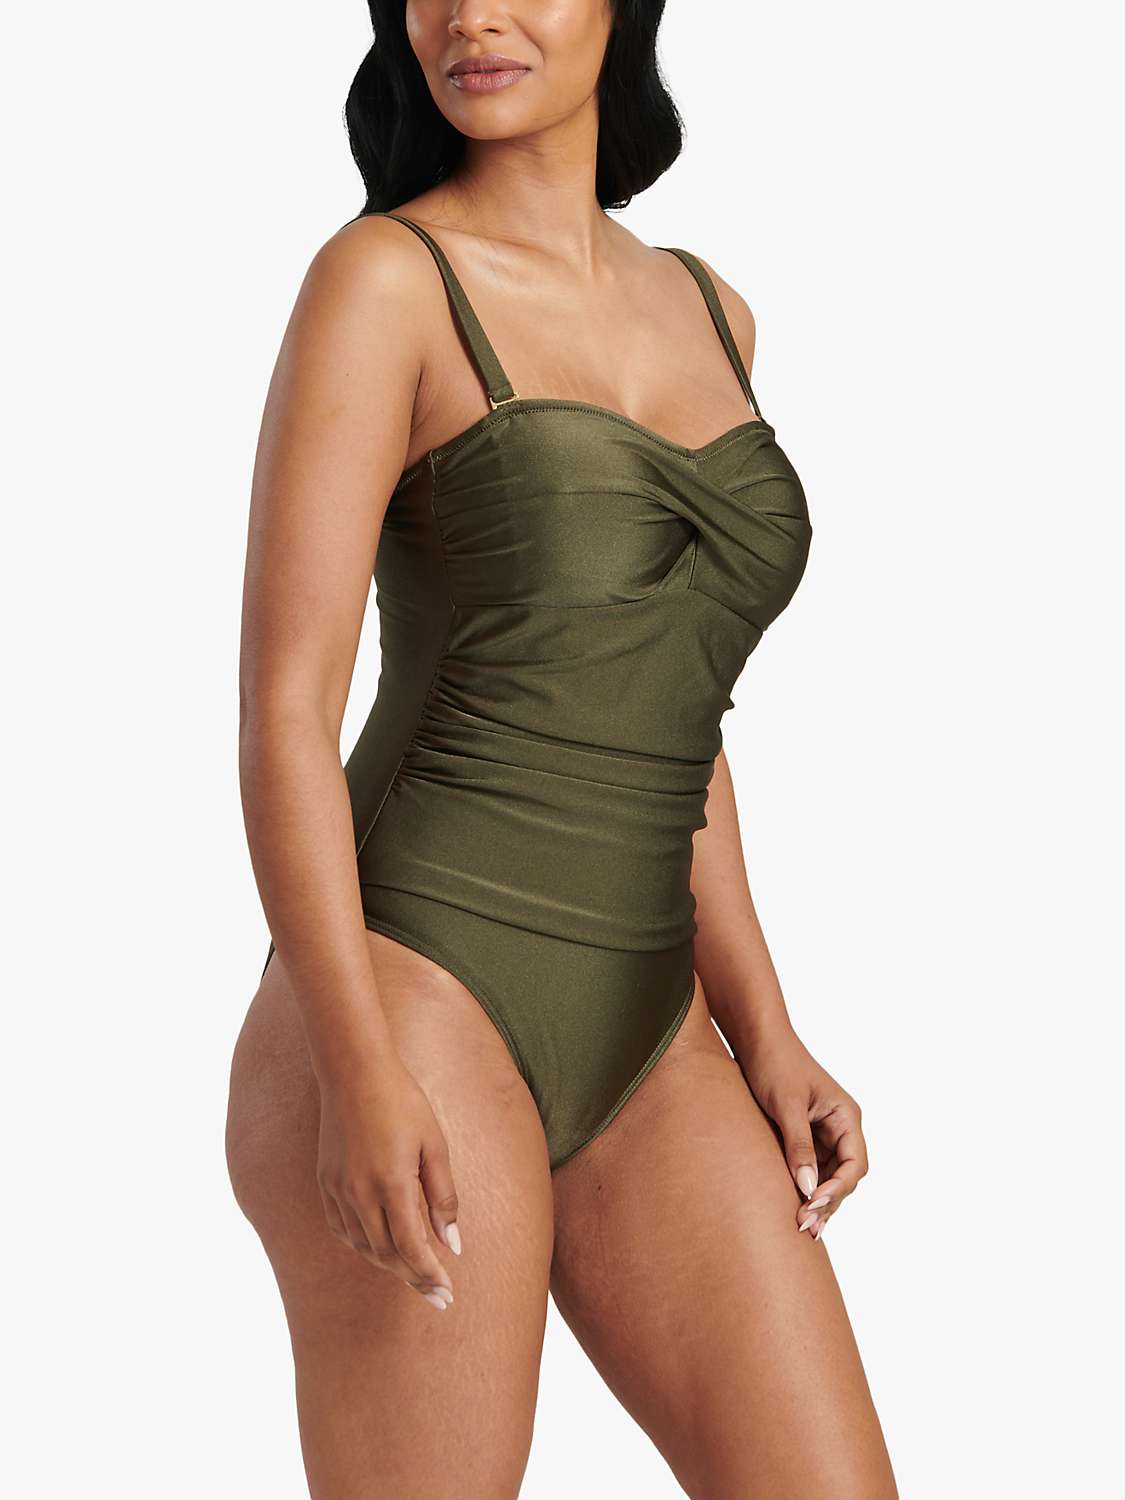 Buy South Beach Bandeau Tummy Control Swimsuit, Olive Online at johnlewis.com